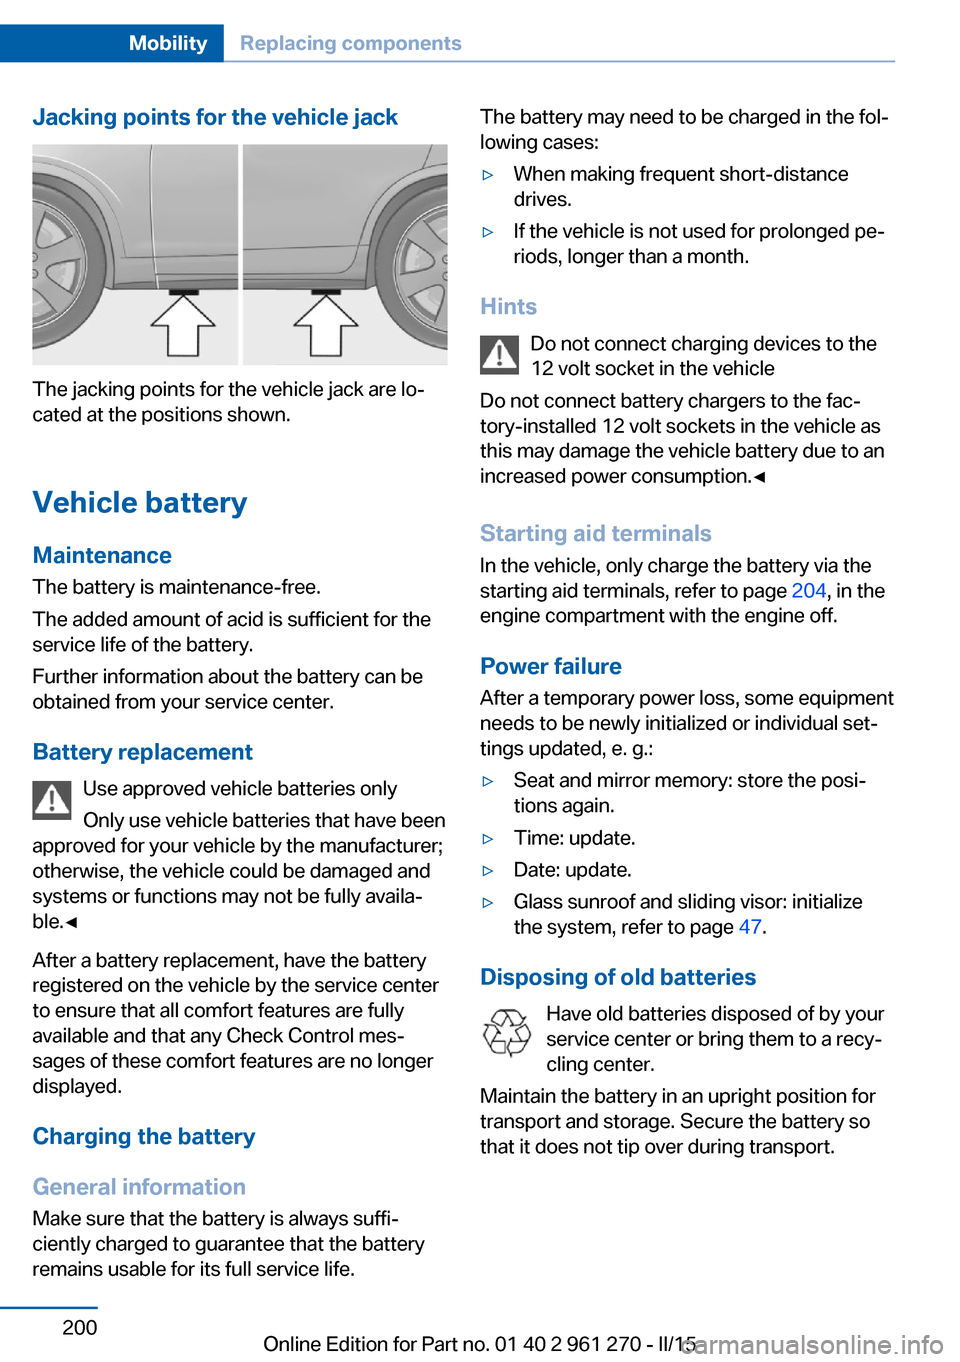 BMW 2 SERIES COUPE 2016 F22 Owners Guide Jacking points for the vehicle jack
The jacking points for the vehicle jack are lo‐
cated at the positions shown.
Vehicle battery Maintenance
The battery is maintenance-free.
The added amount of aci